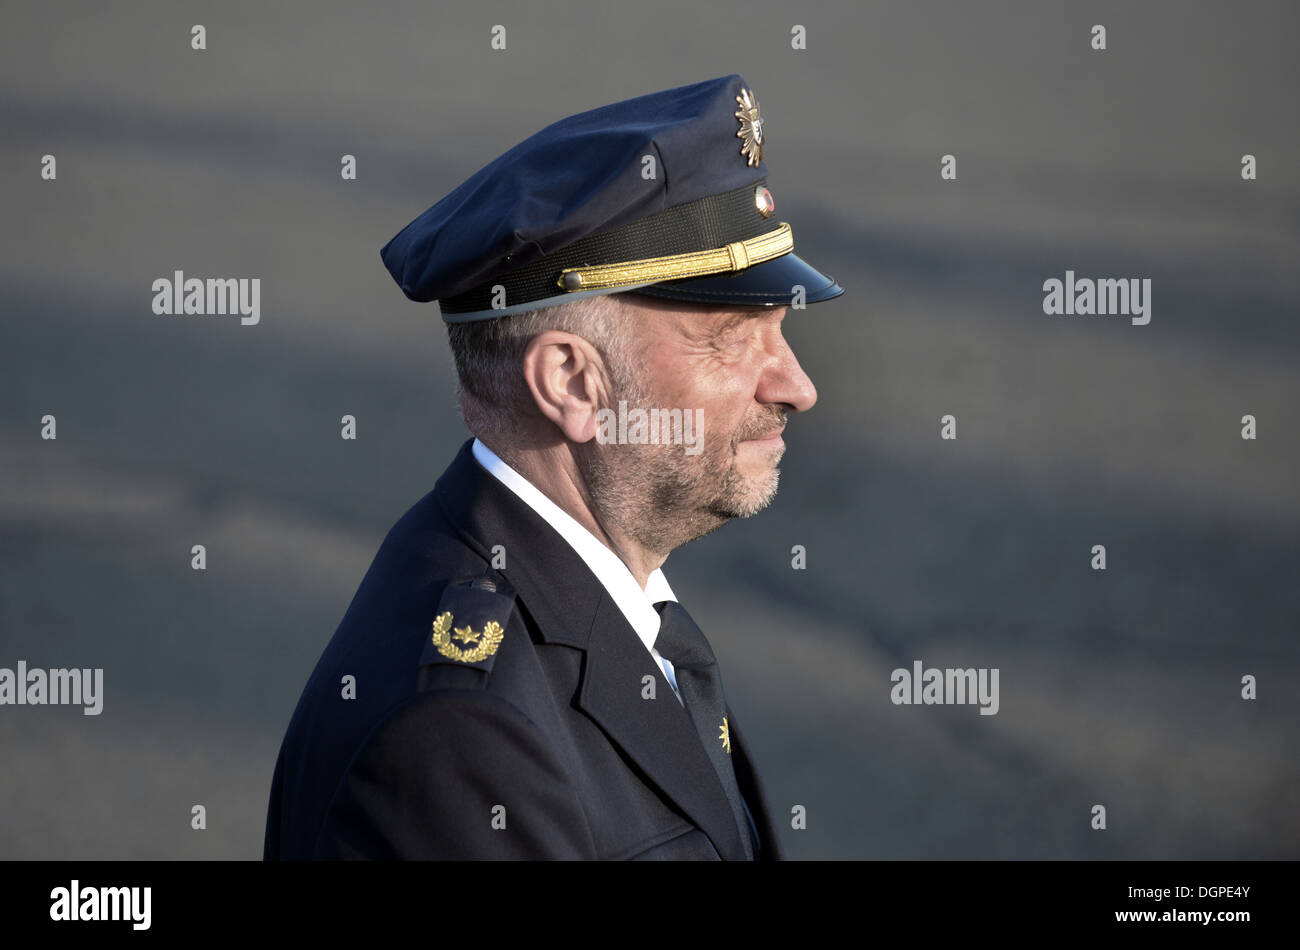 Berlin, Germany, Andreas Pahl, head of the Directorate of Police Headquarters 4 Stock Photo